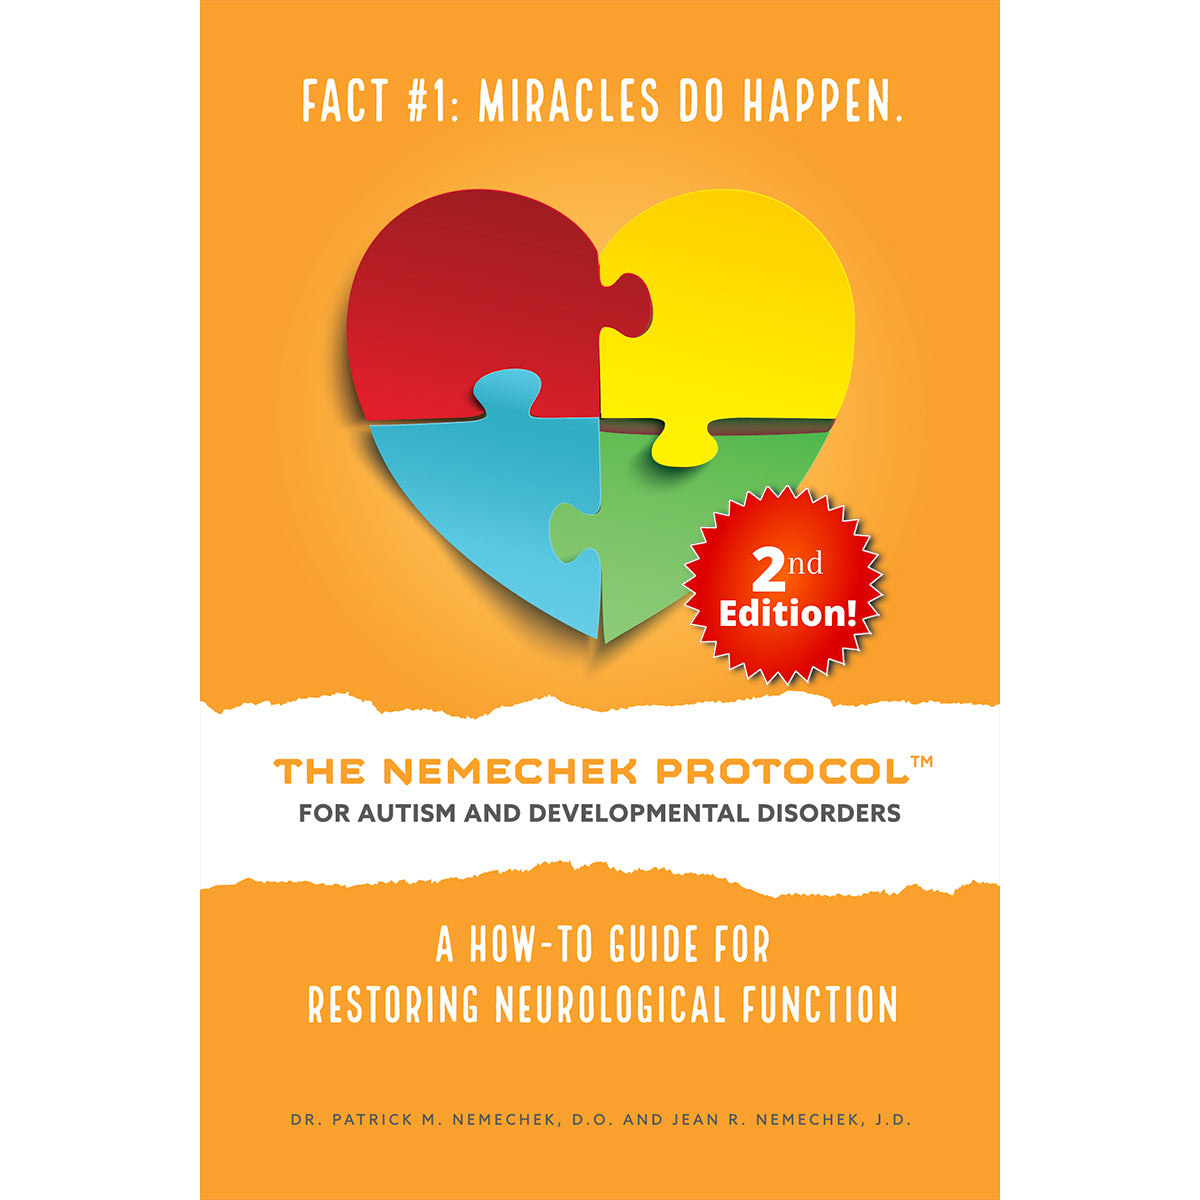 2nd Ed. eBook, The Nemechek Protocol for Autism and Developmental Disorders - English Google Play Version